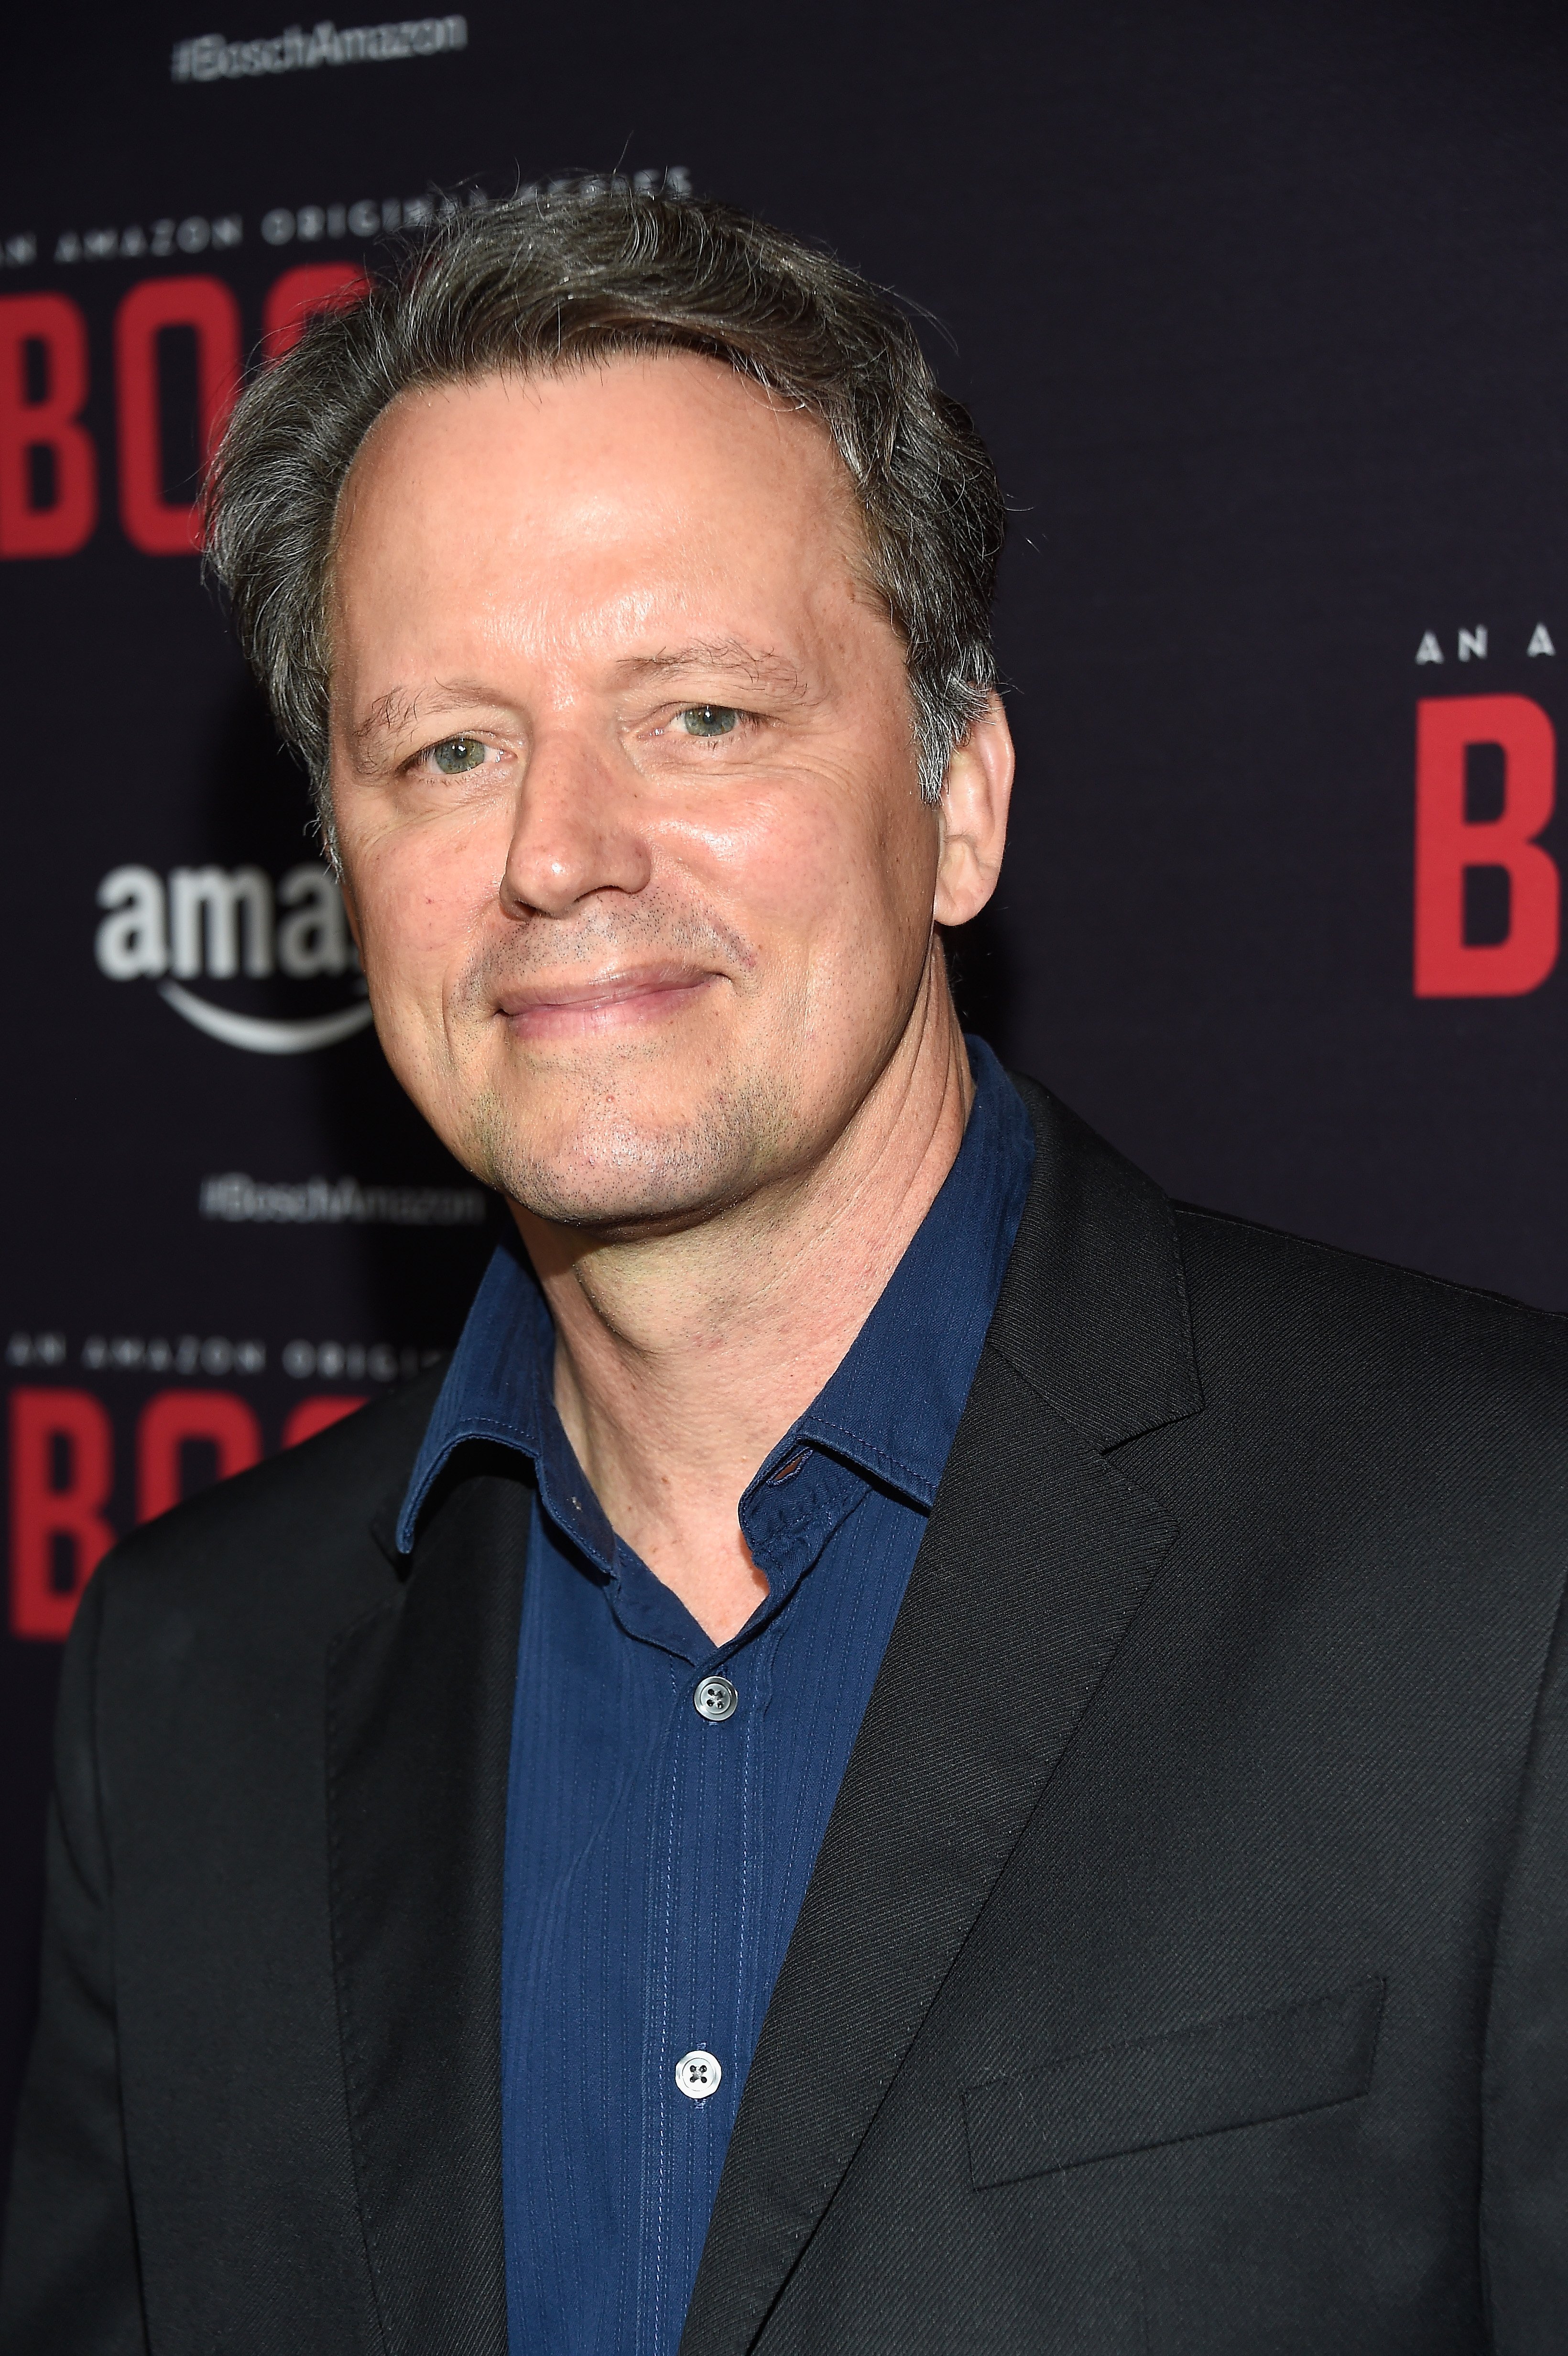 Steven Culp arrrives at the Premiere Of Amazon's "Bosch" Season 2 at SilverScreen Theater at the Pacific Design Center on March 3, 2016, in West Hollywood, California. | Source: Getty Images.